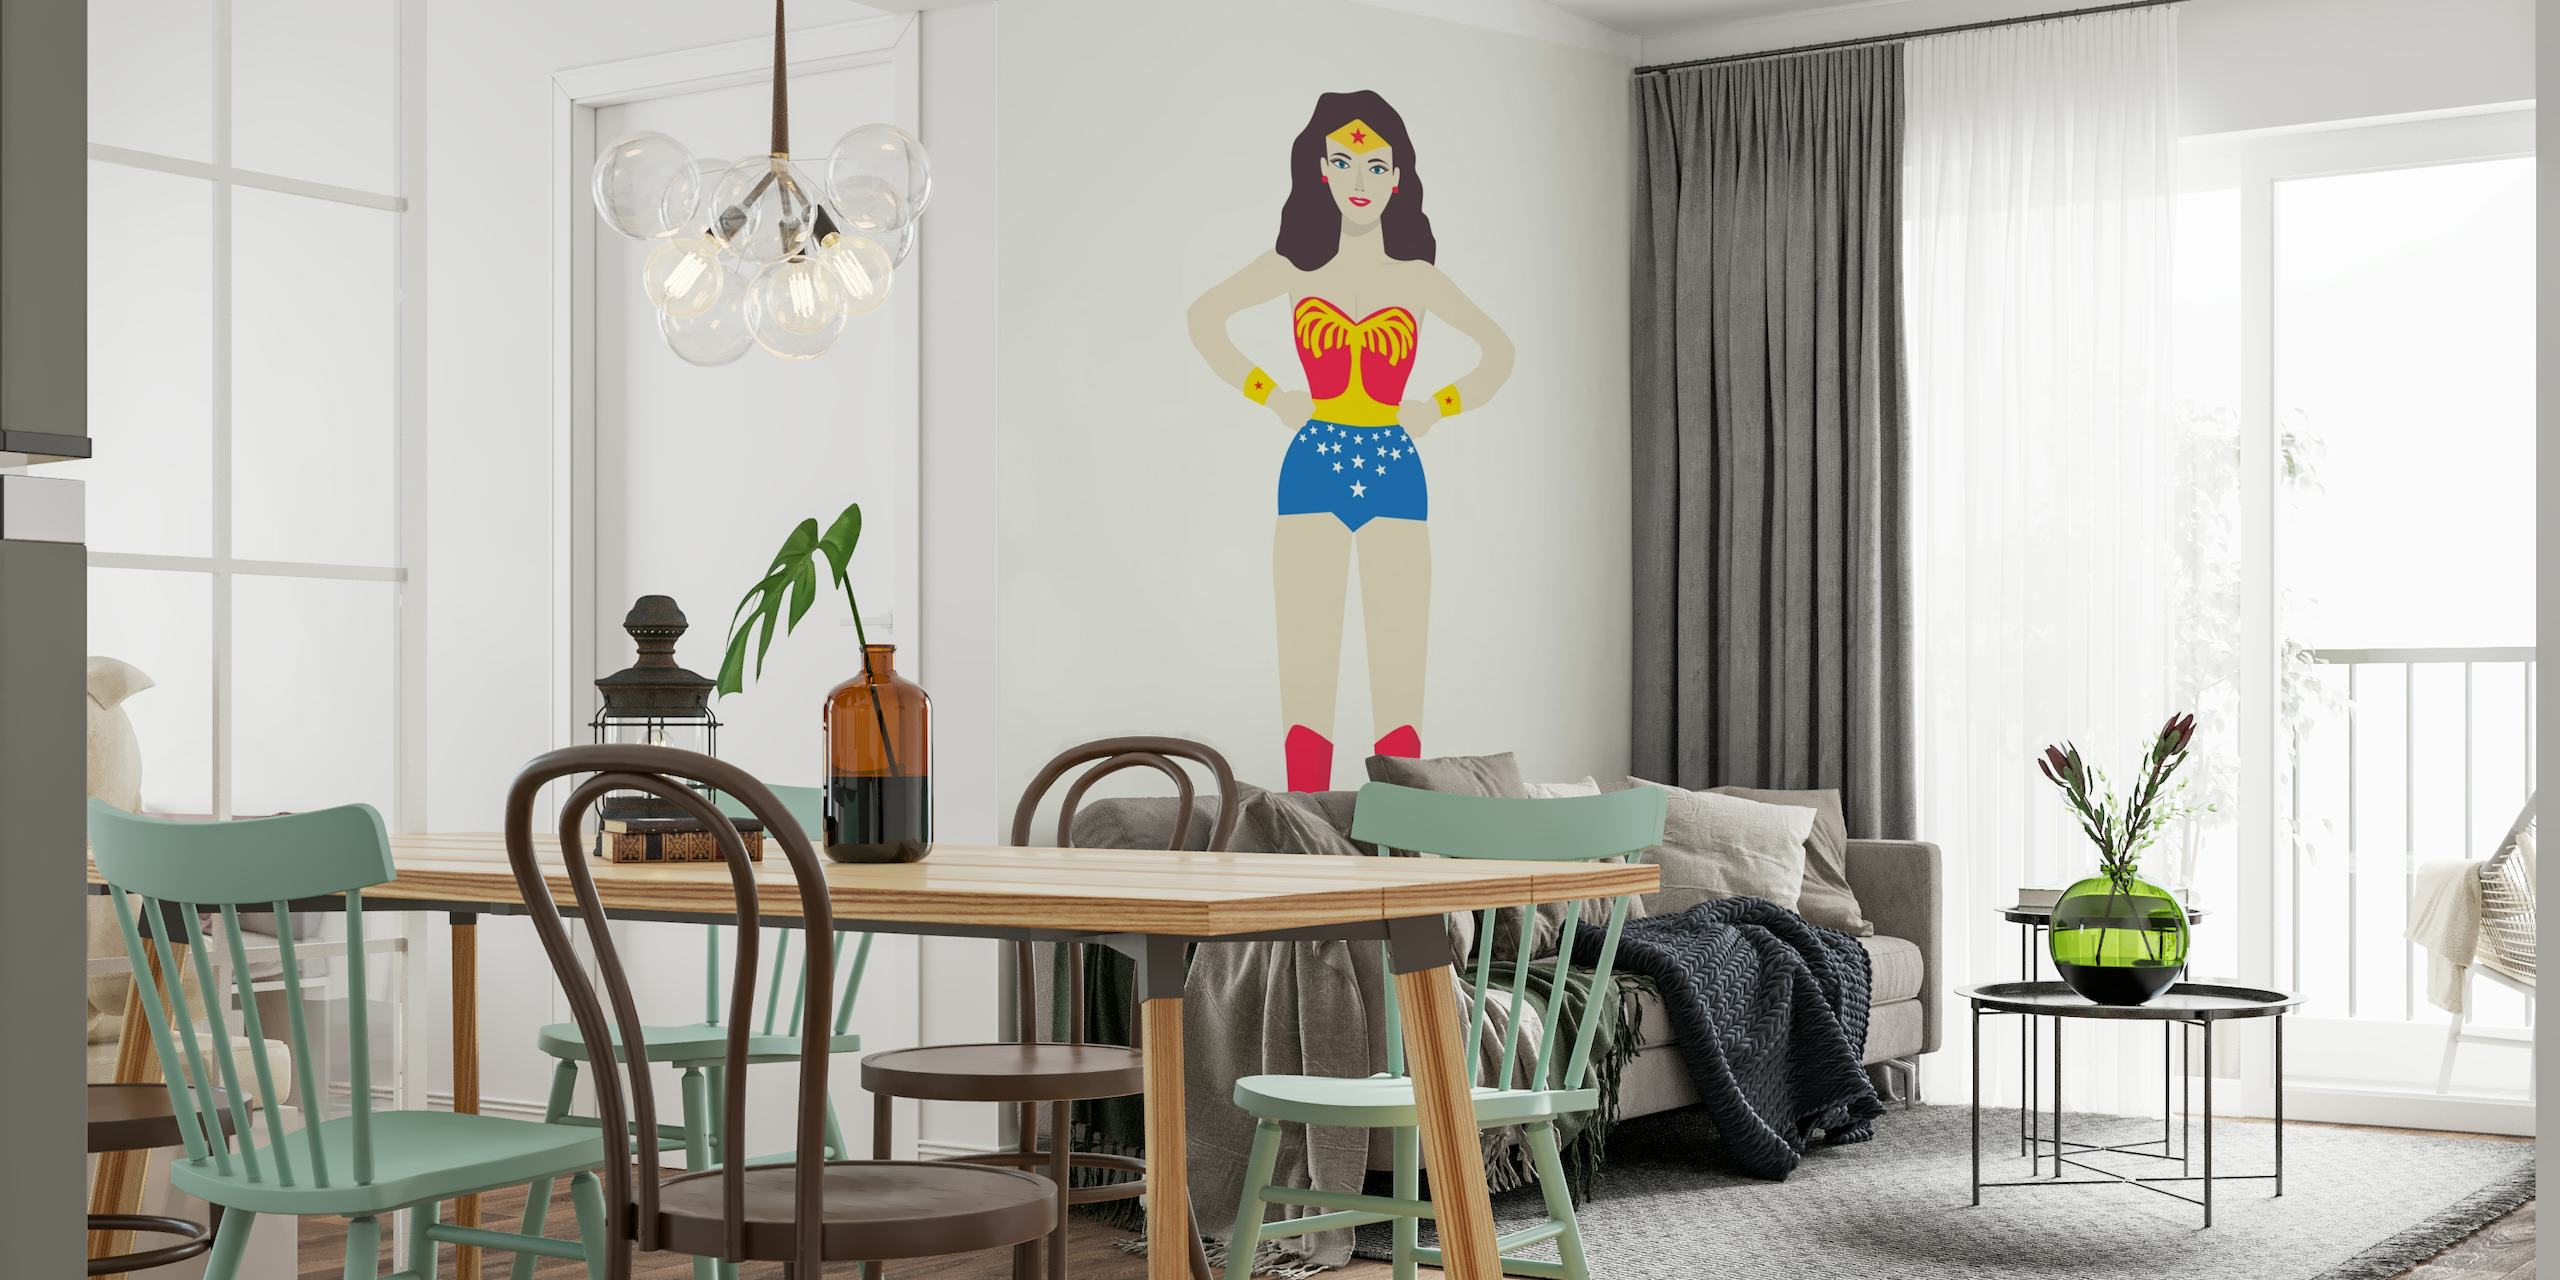 Stylized illustration of a superheroine with red boots, star-spangled blue shorts, and a red and gold top on a wall mural